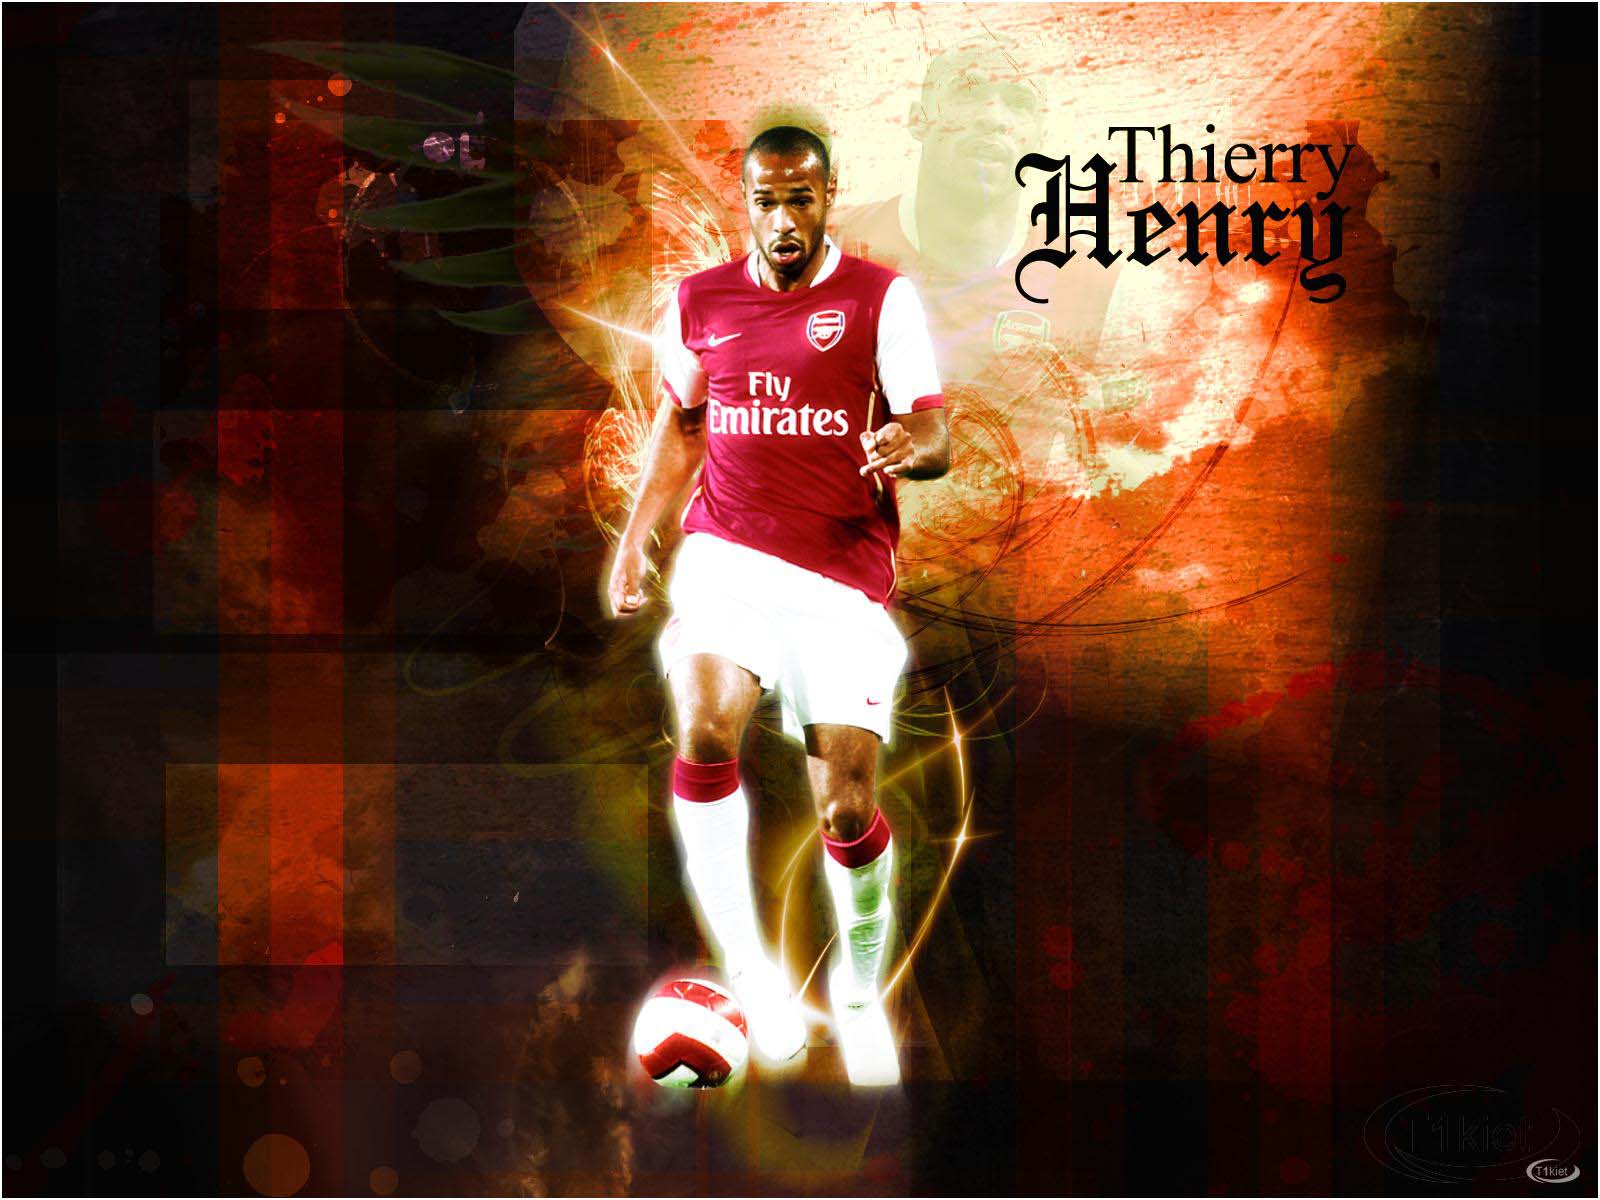 Thierry Henry Biography and Wallpapers | Football Players ...